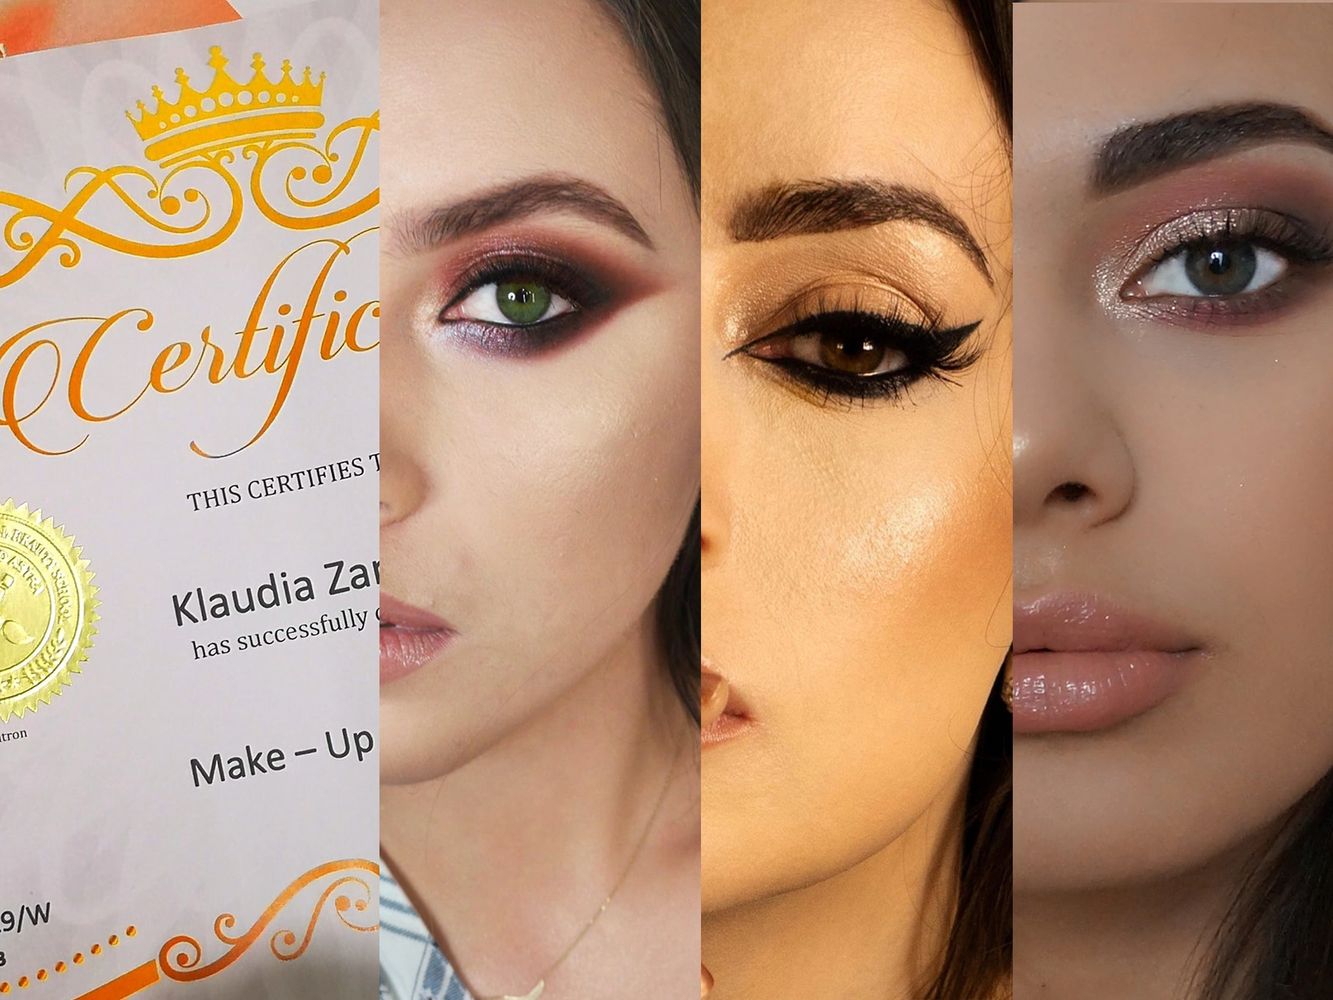 Klaudia Makeup Experience - Make Up and other treatments